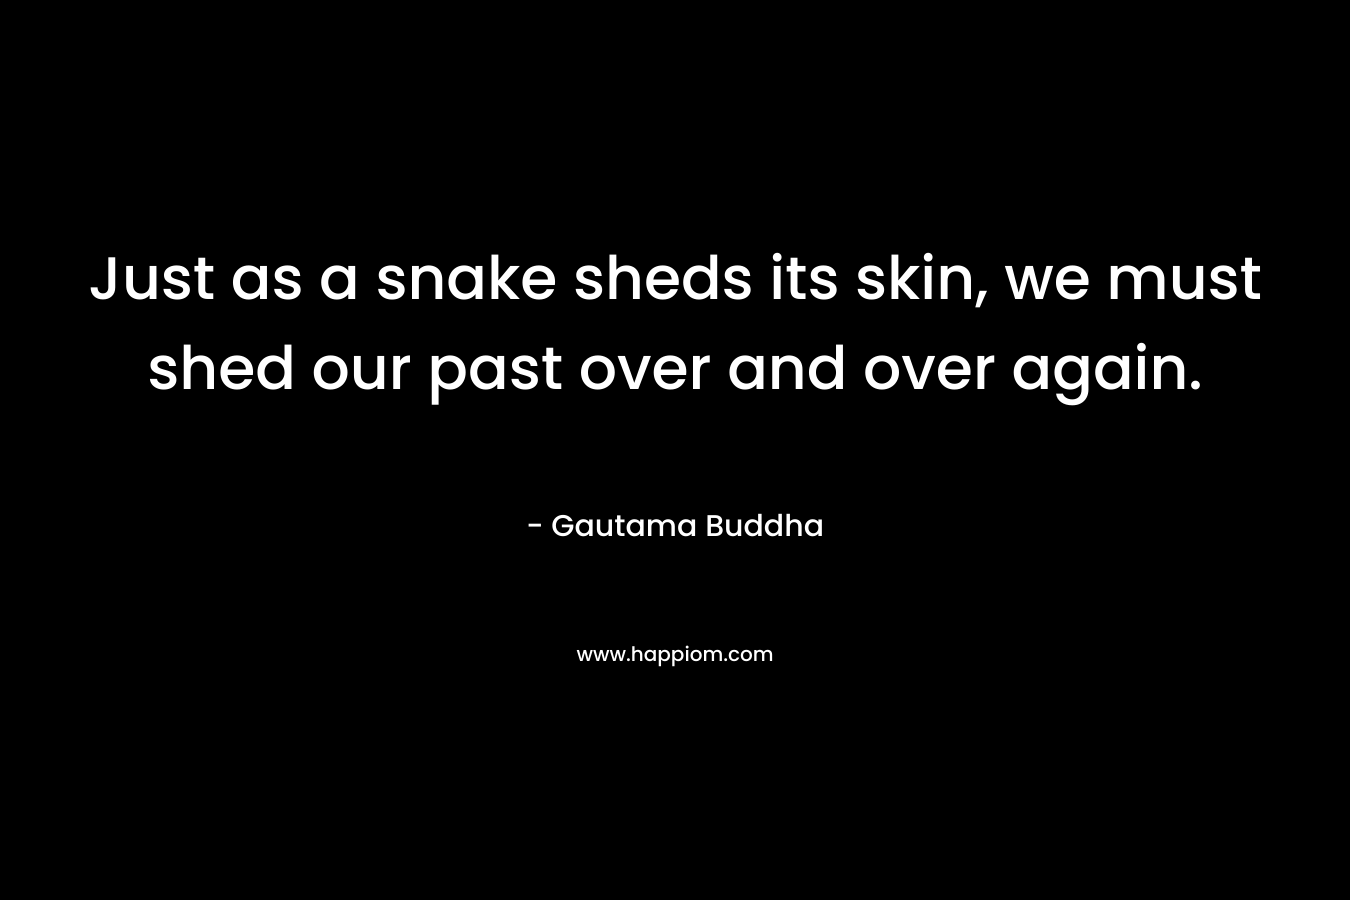 Just as a snake sheds its skin, we must shed our past over and over again. – Gautama Buddha